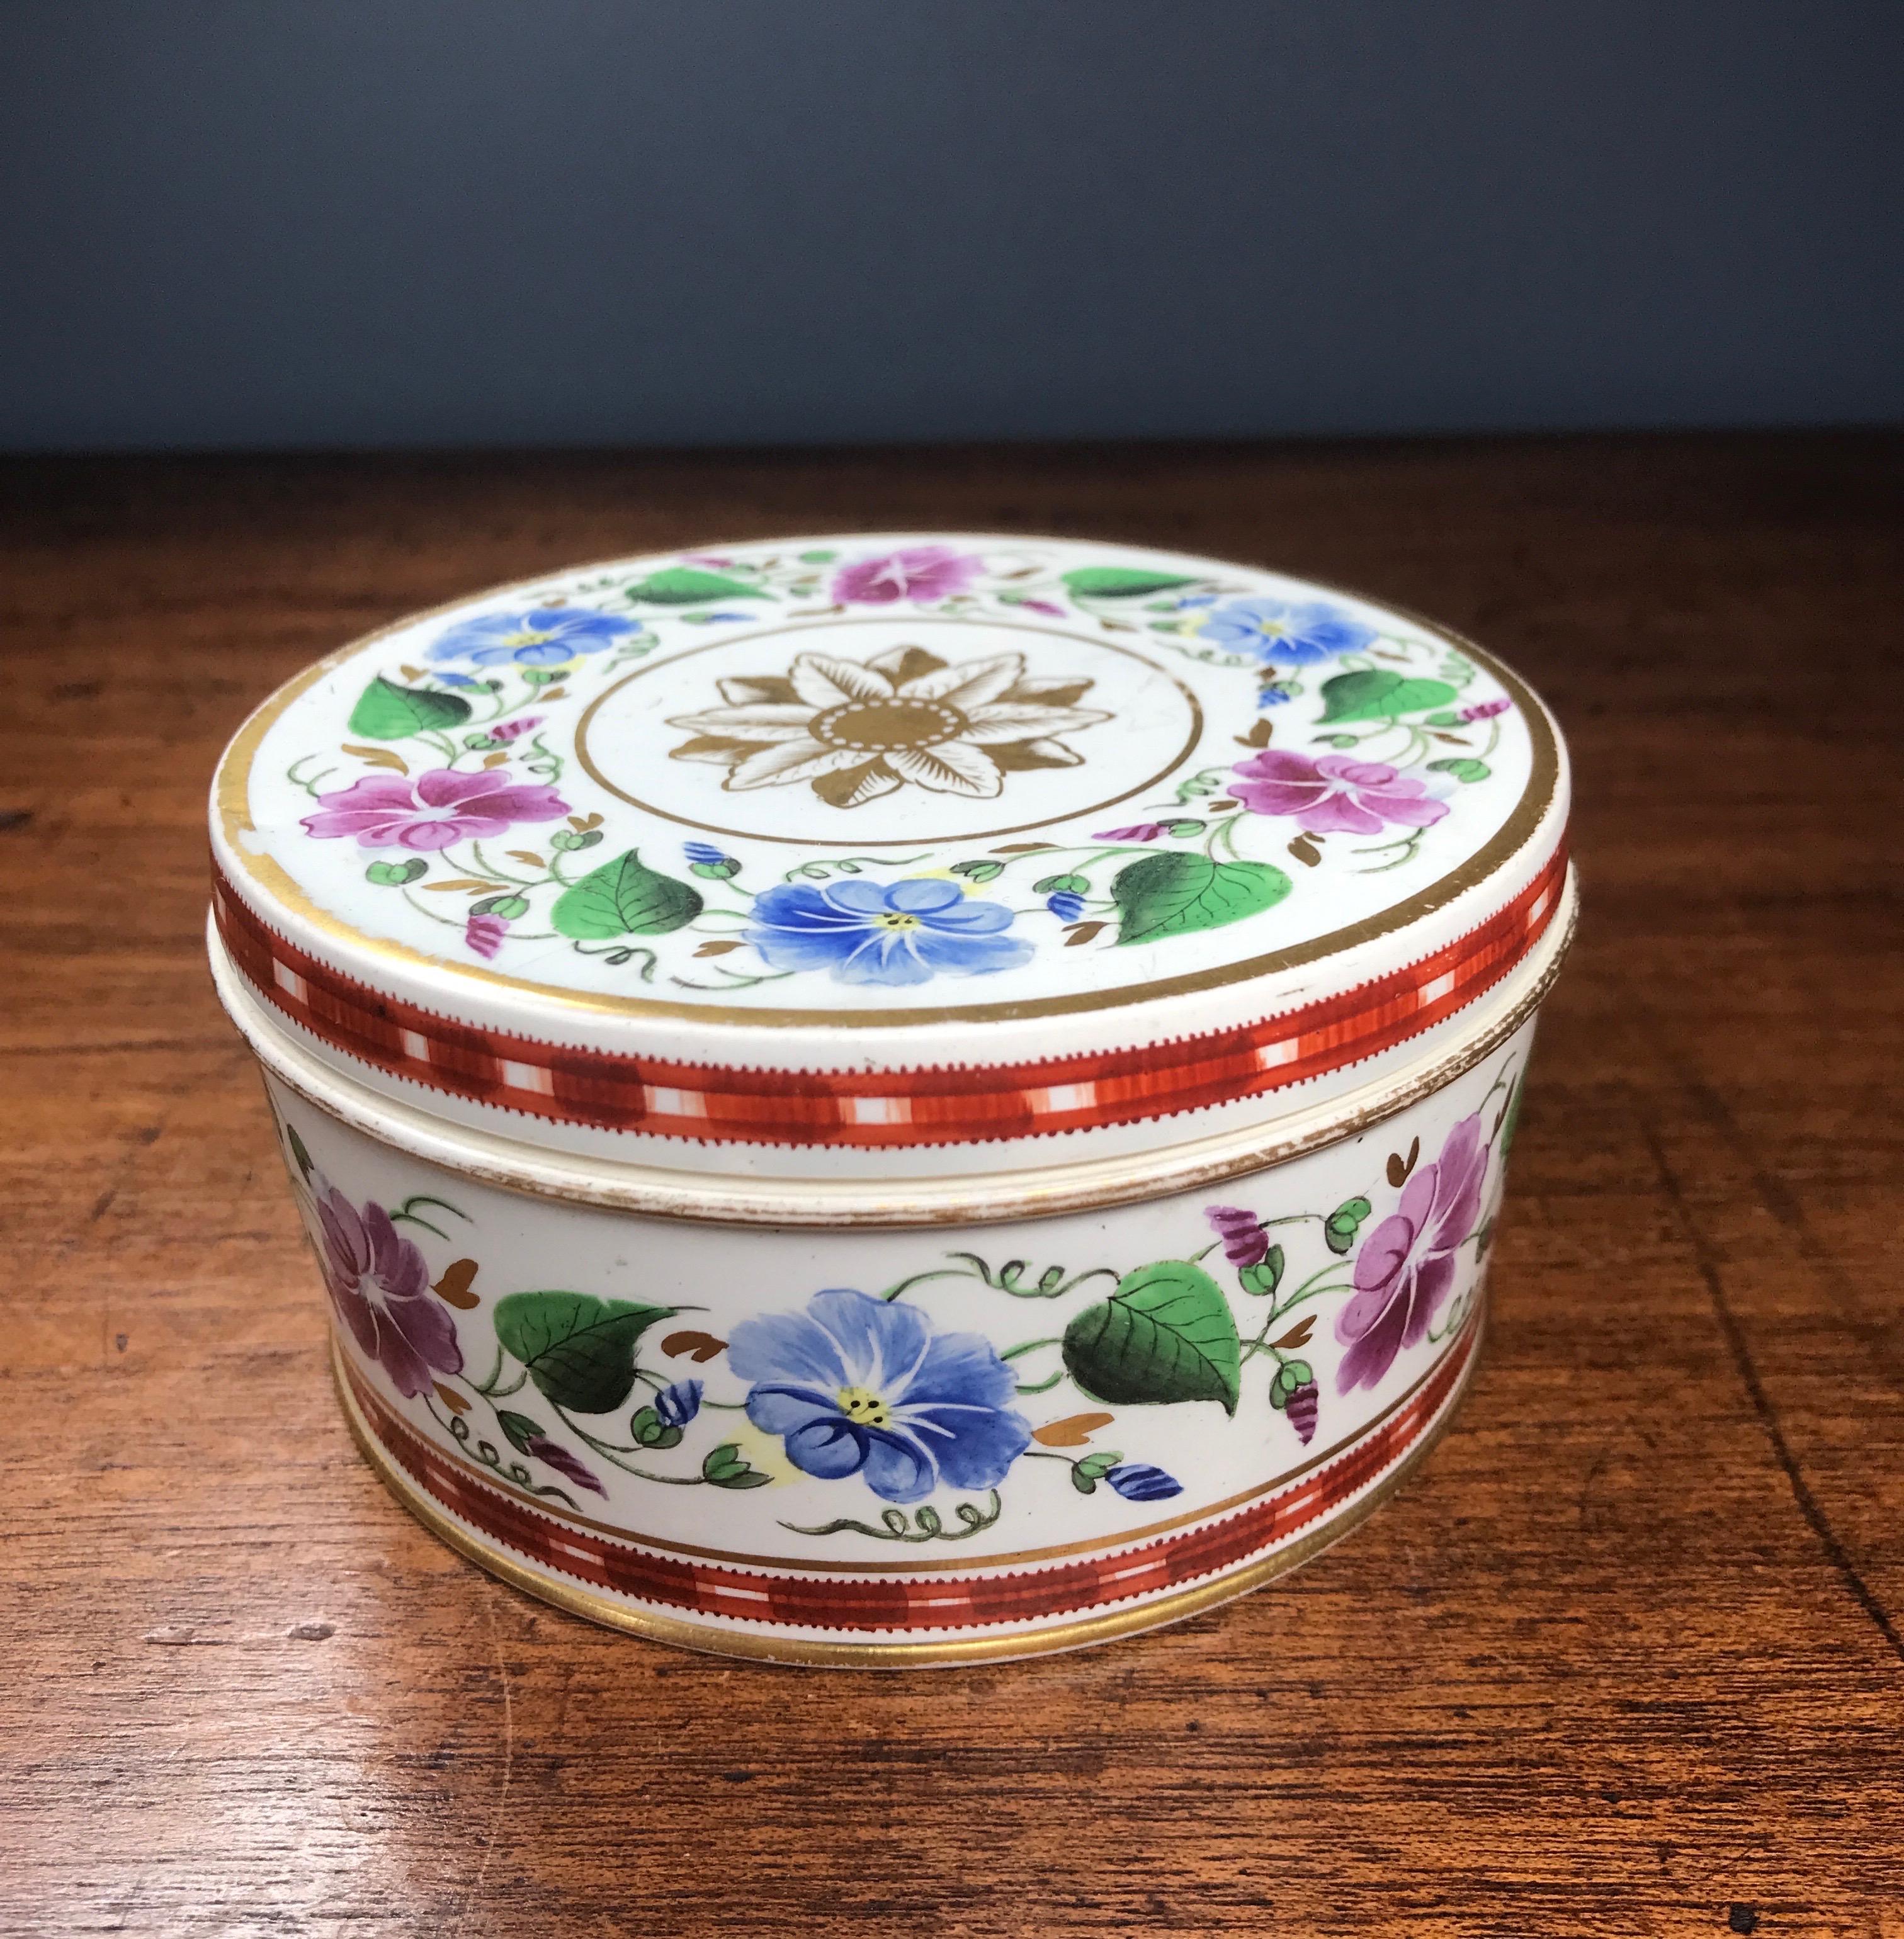 Elegant Pearlware Box, Convolvulus & Gilt Decoration, c. 1825 In Good Condition For Sale In Geelong, Victoria